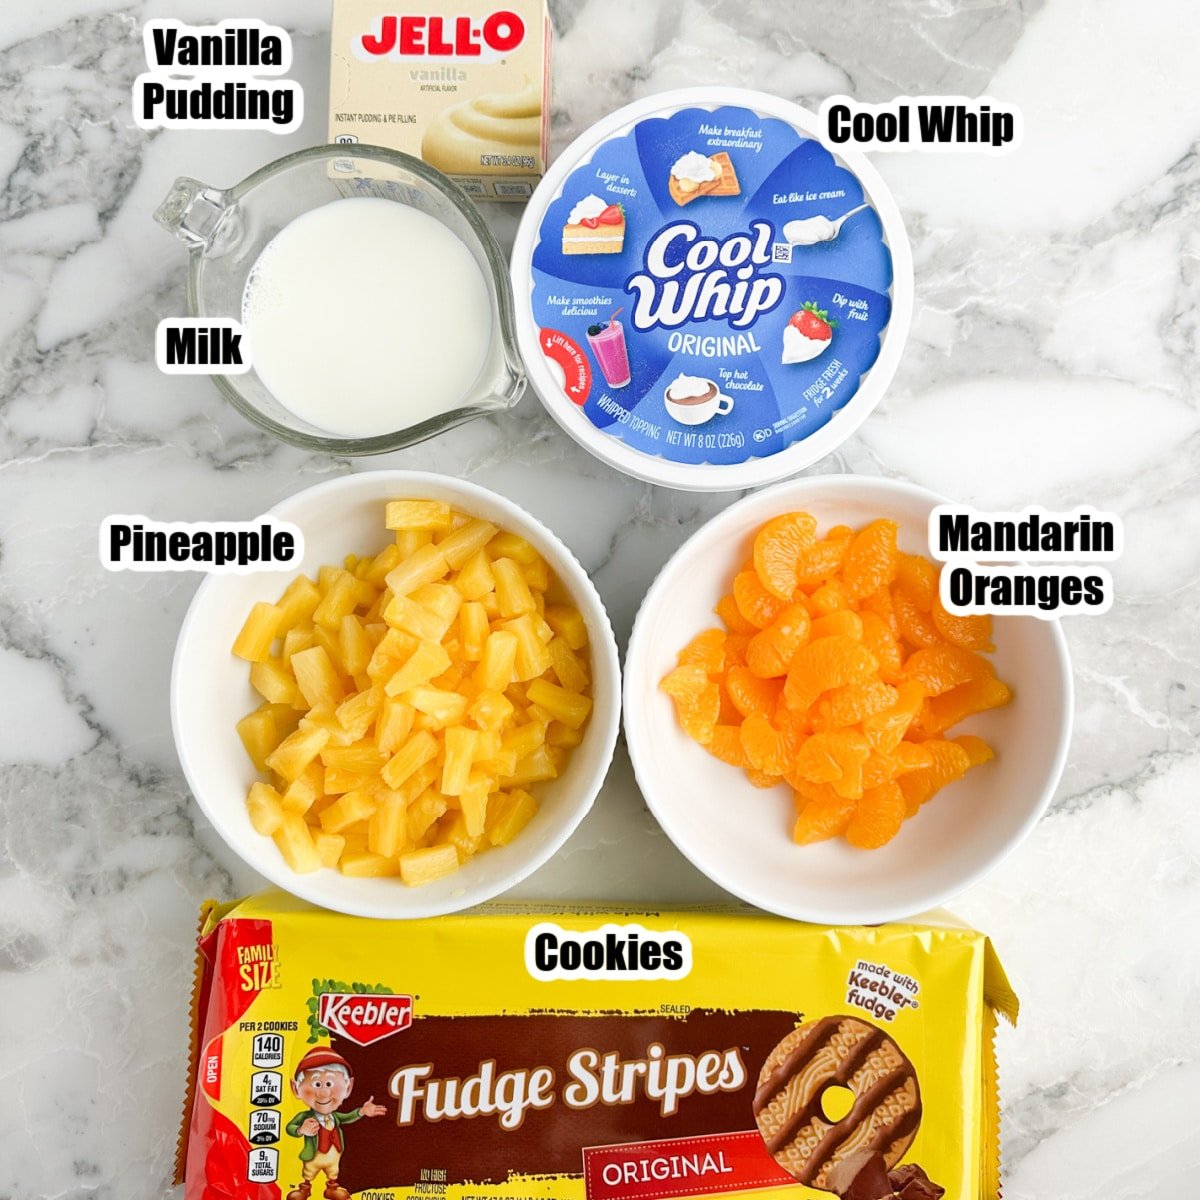 Vanilla pudding, milk, Cool Whip, pineapple, oranges, and fudge striped cookies.